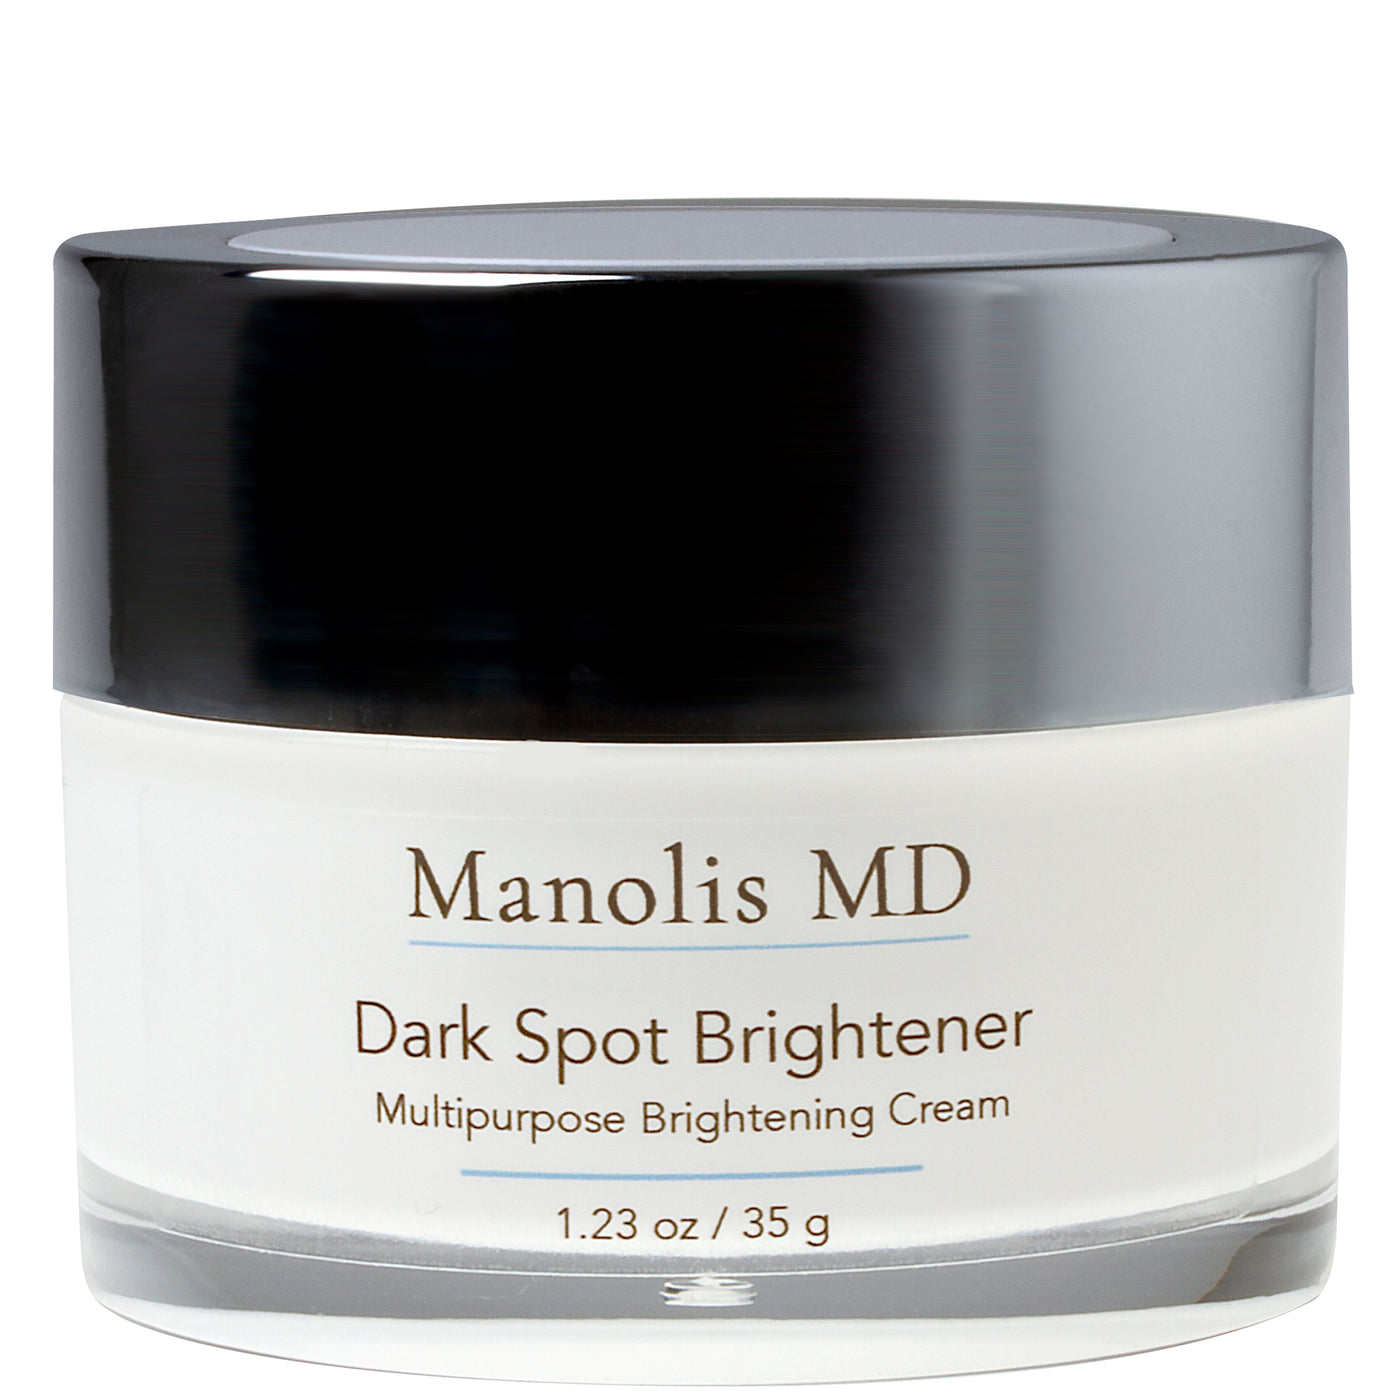 The Dark Spot Brightener is one of our bestselling products. It is an elegant brightening moisturizer enhanced with Vitamins C, E and Glycolic acid.